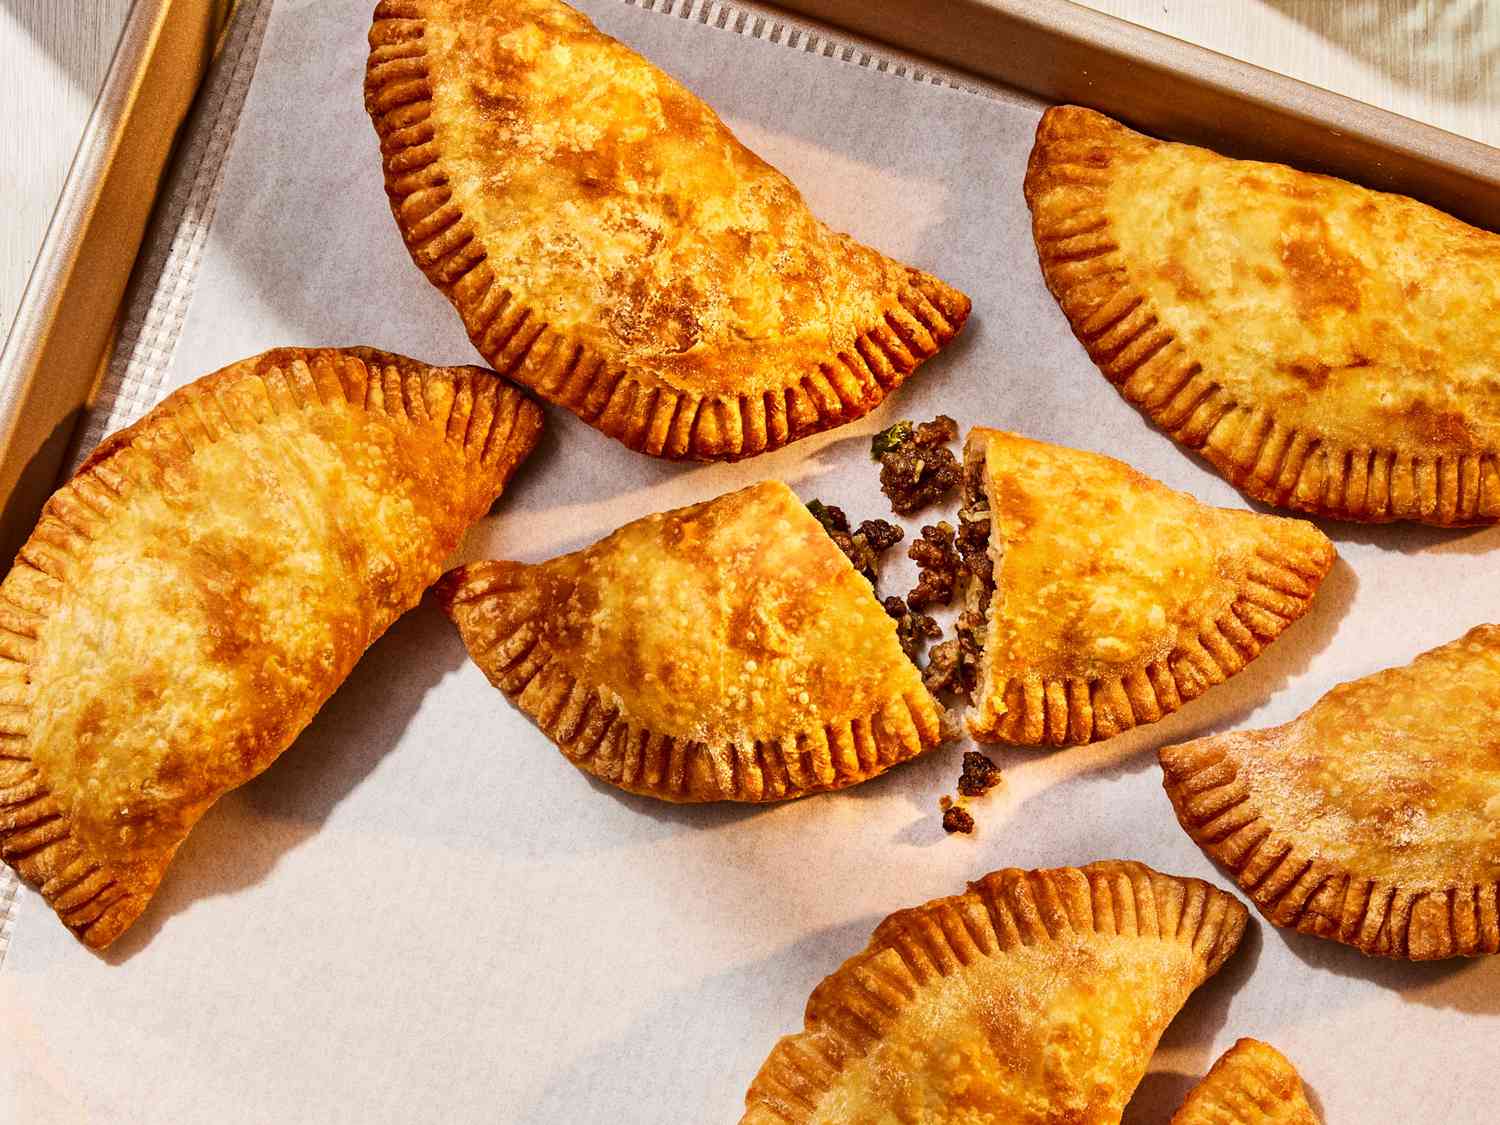 Authentic Natchitoches Meat Pies